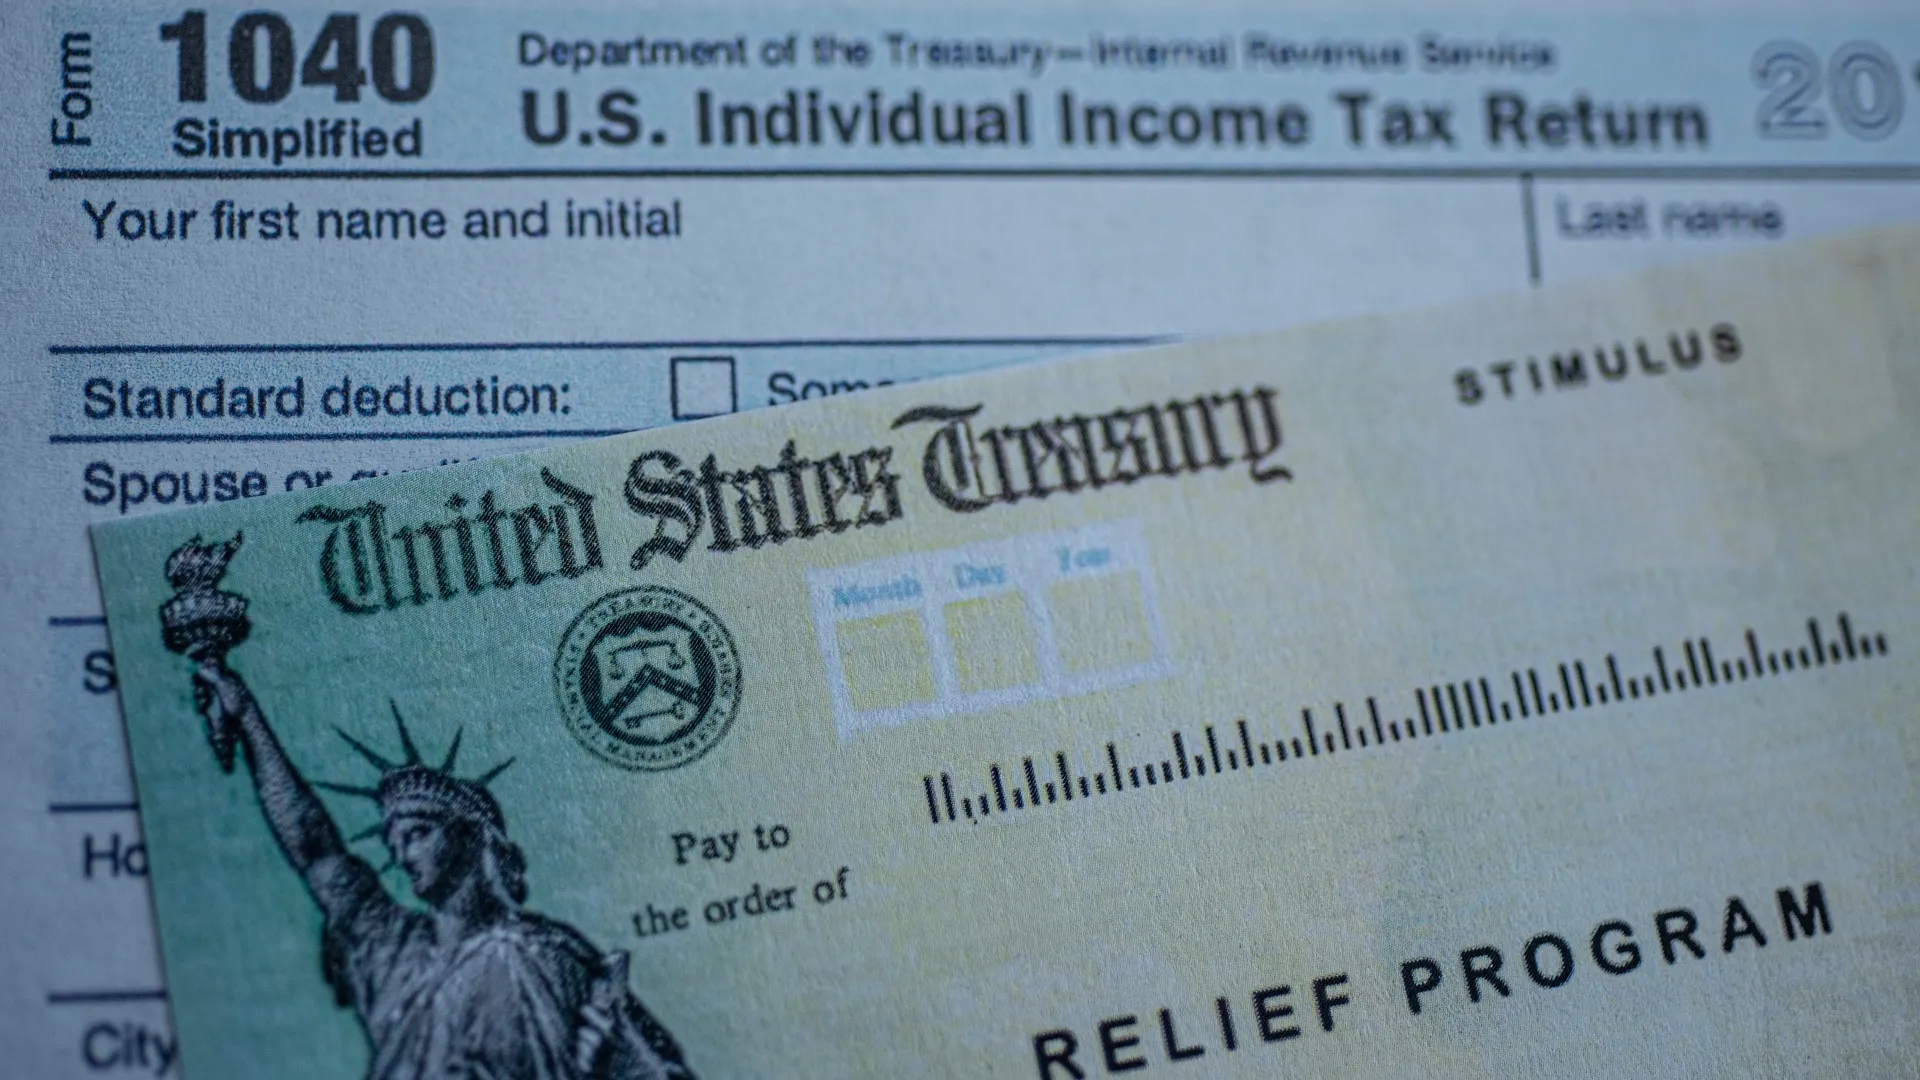 Form 1040 U.S. Individual Income tax return next to the Stimulus Check Relief program. Close up view. stock photo